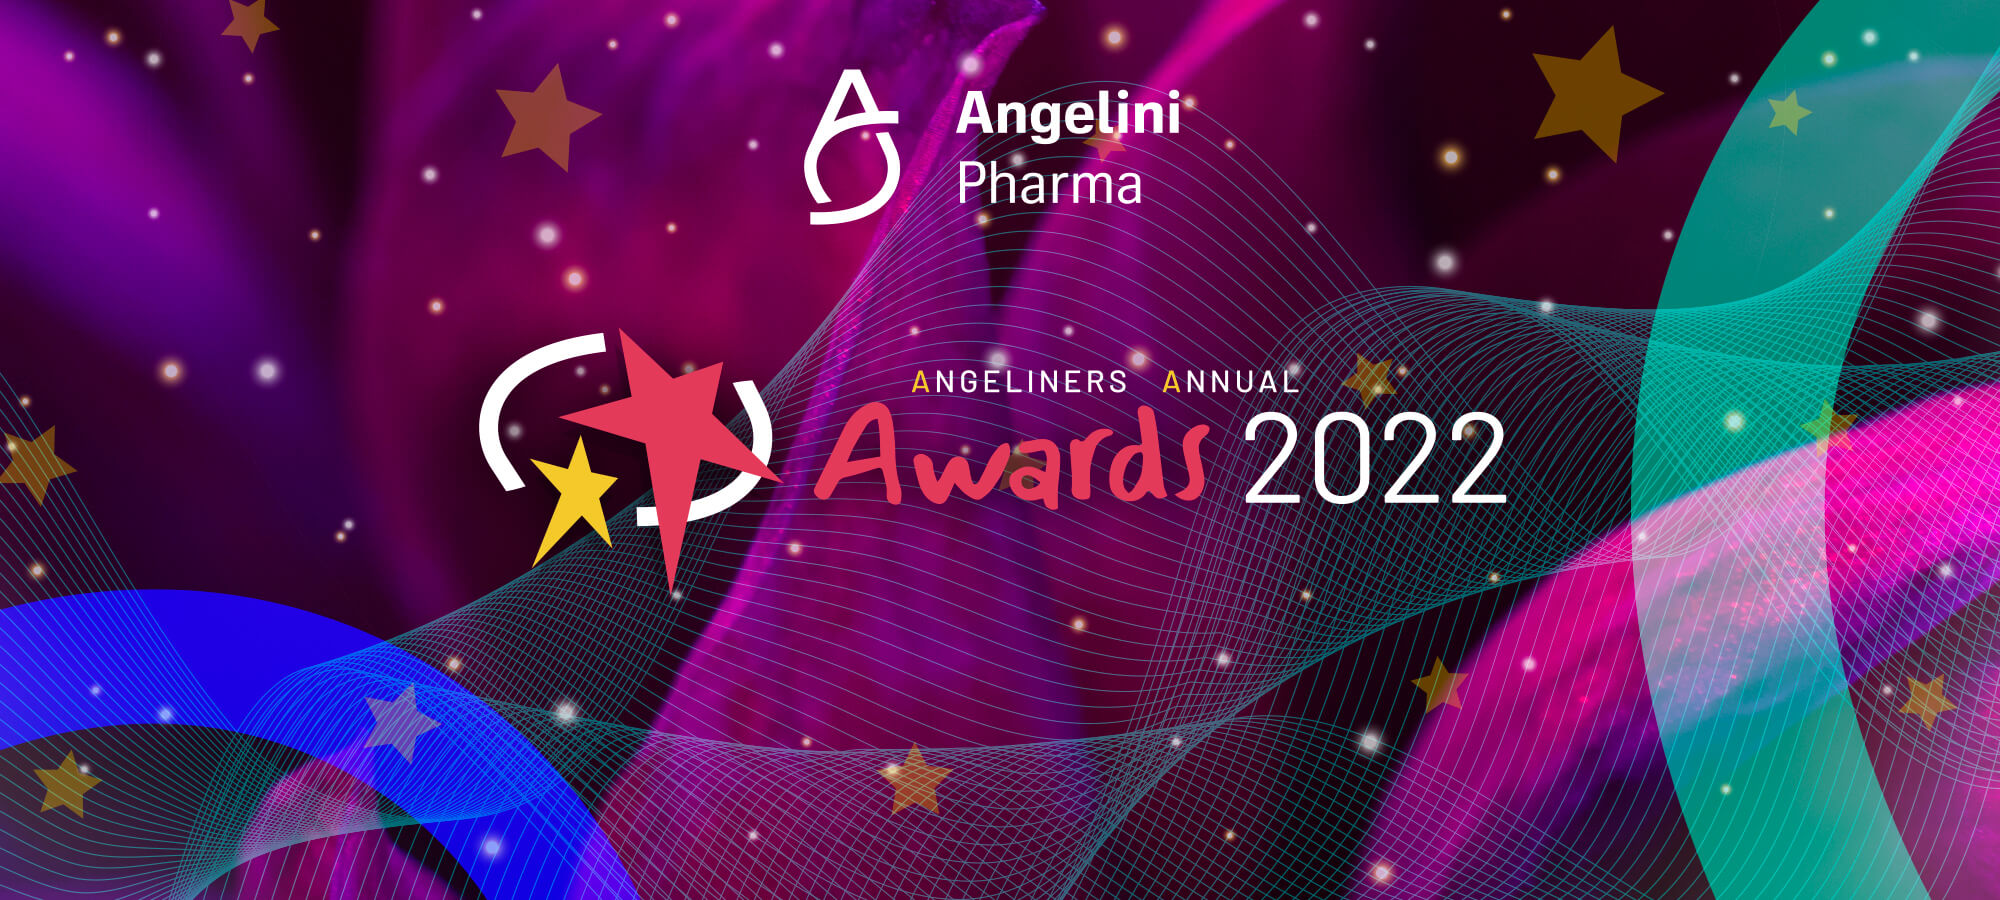 Angeliners annual Awards 2022: evento carbon neutral